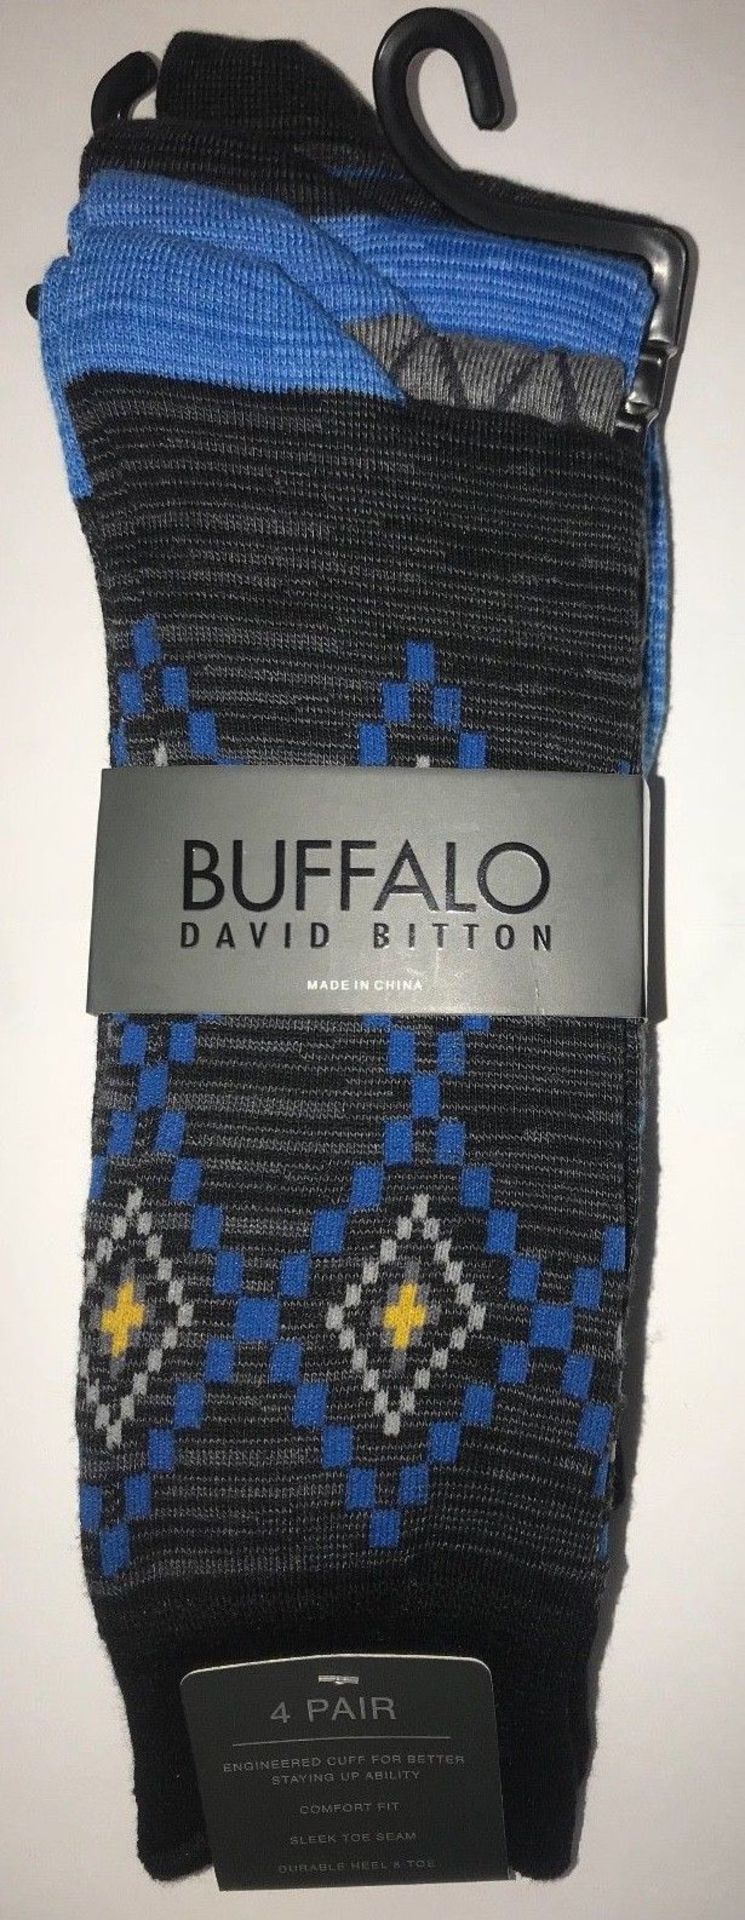 32 X 4 PACKS OF BUFFALO DAVID BITTON CREW SOCKS THESE SOCKS SELL AT THE BUFFALO STORES FOR $29.95